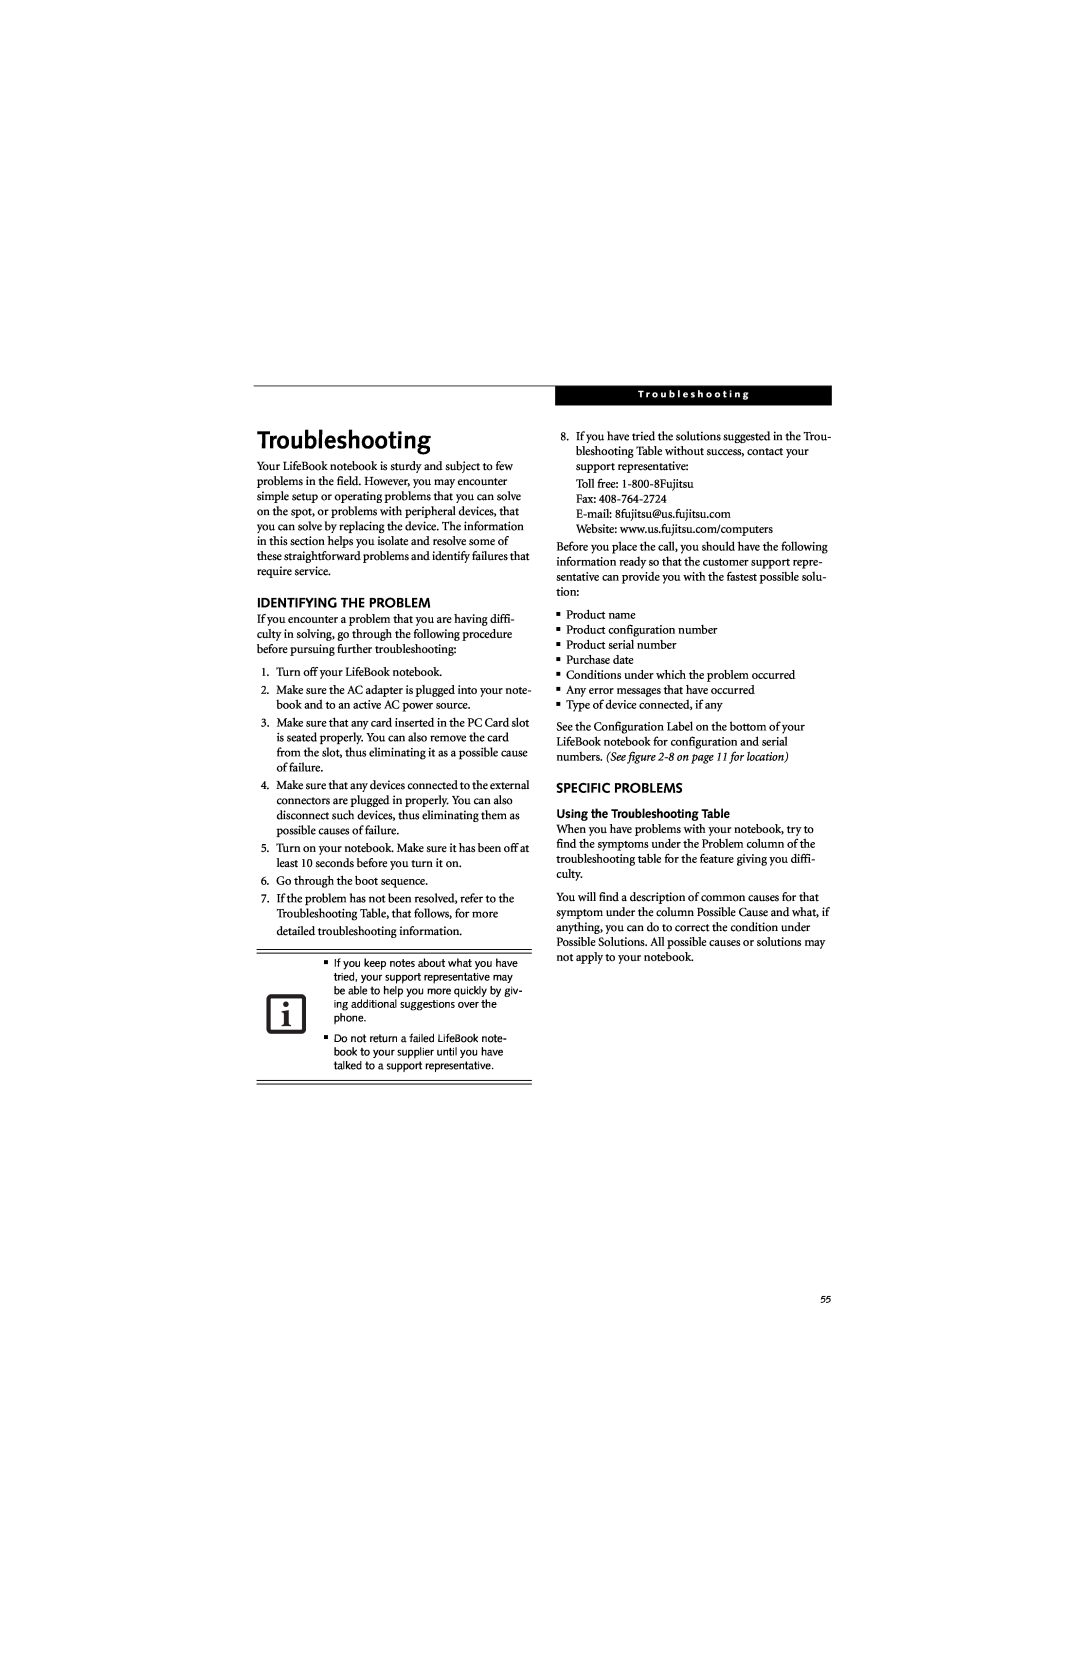 Fujitsu B6220 manual Identifying The Problem, Specific Problems, Using the Troubleshooting Table 